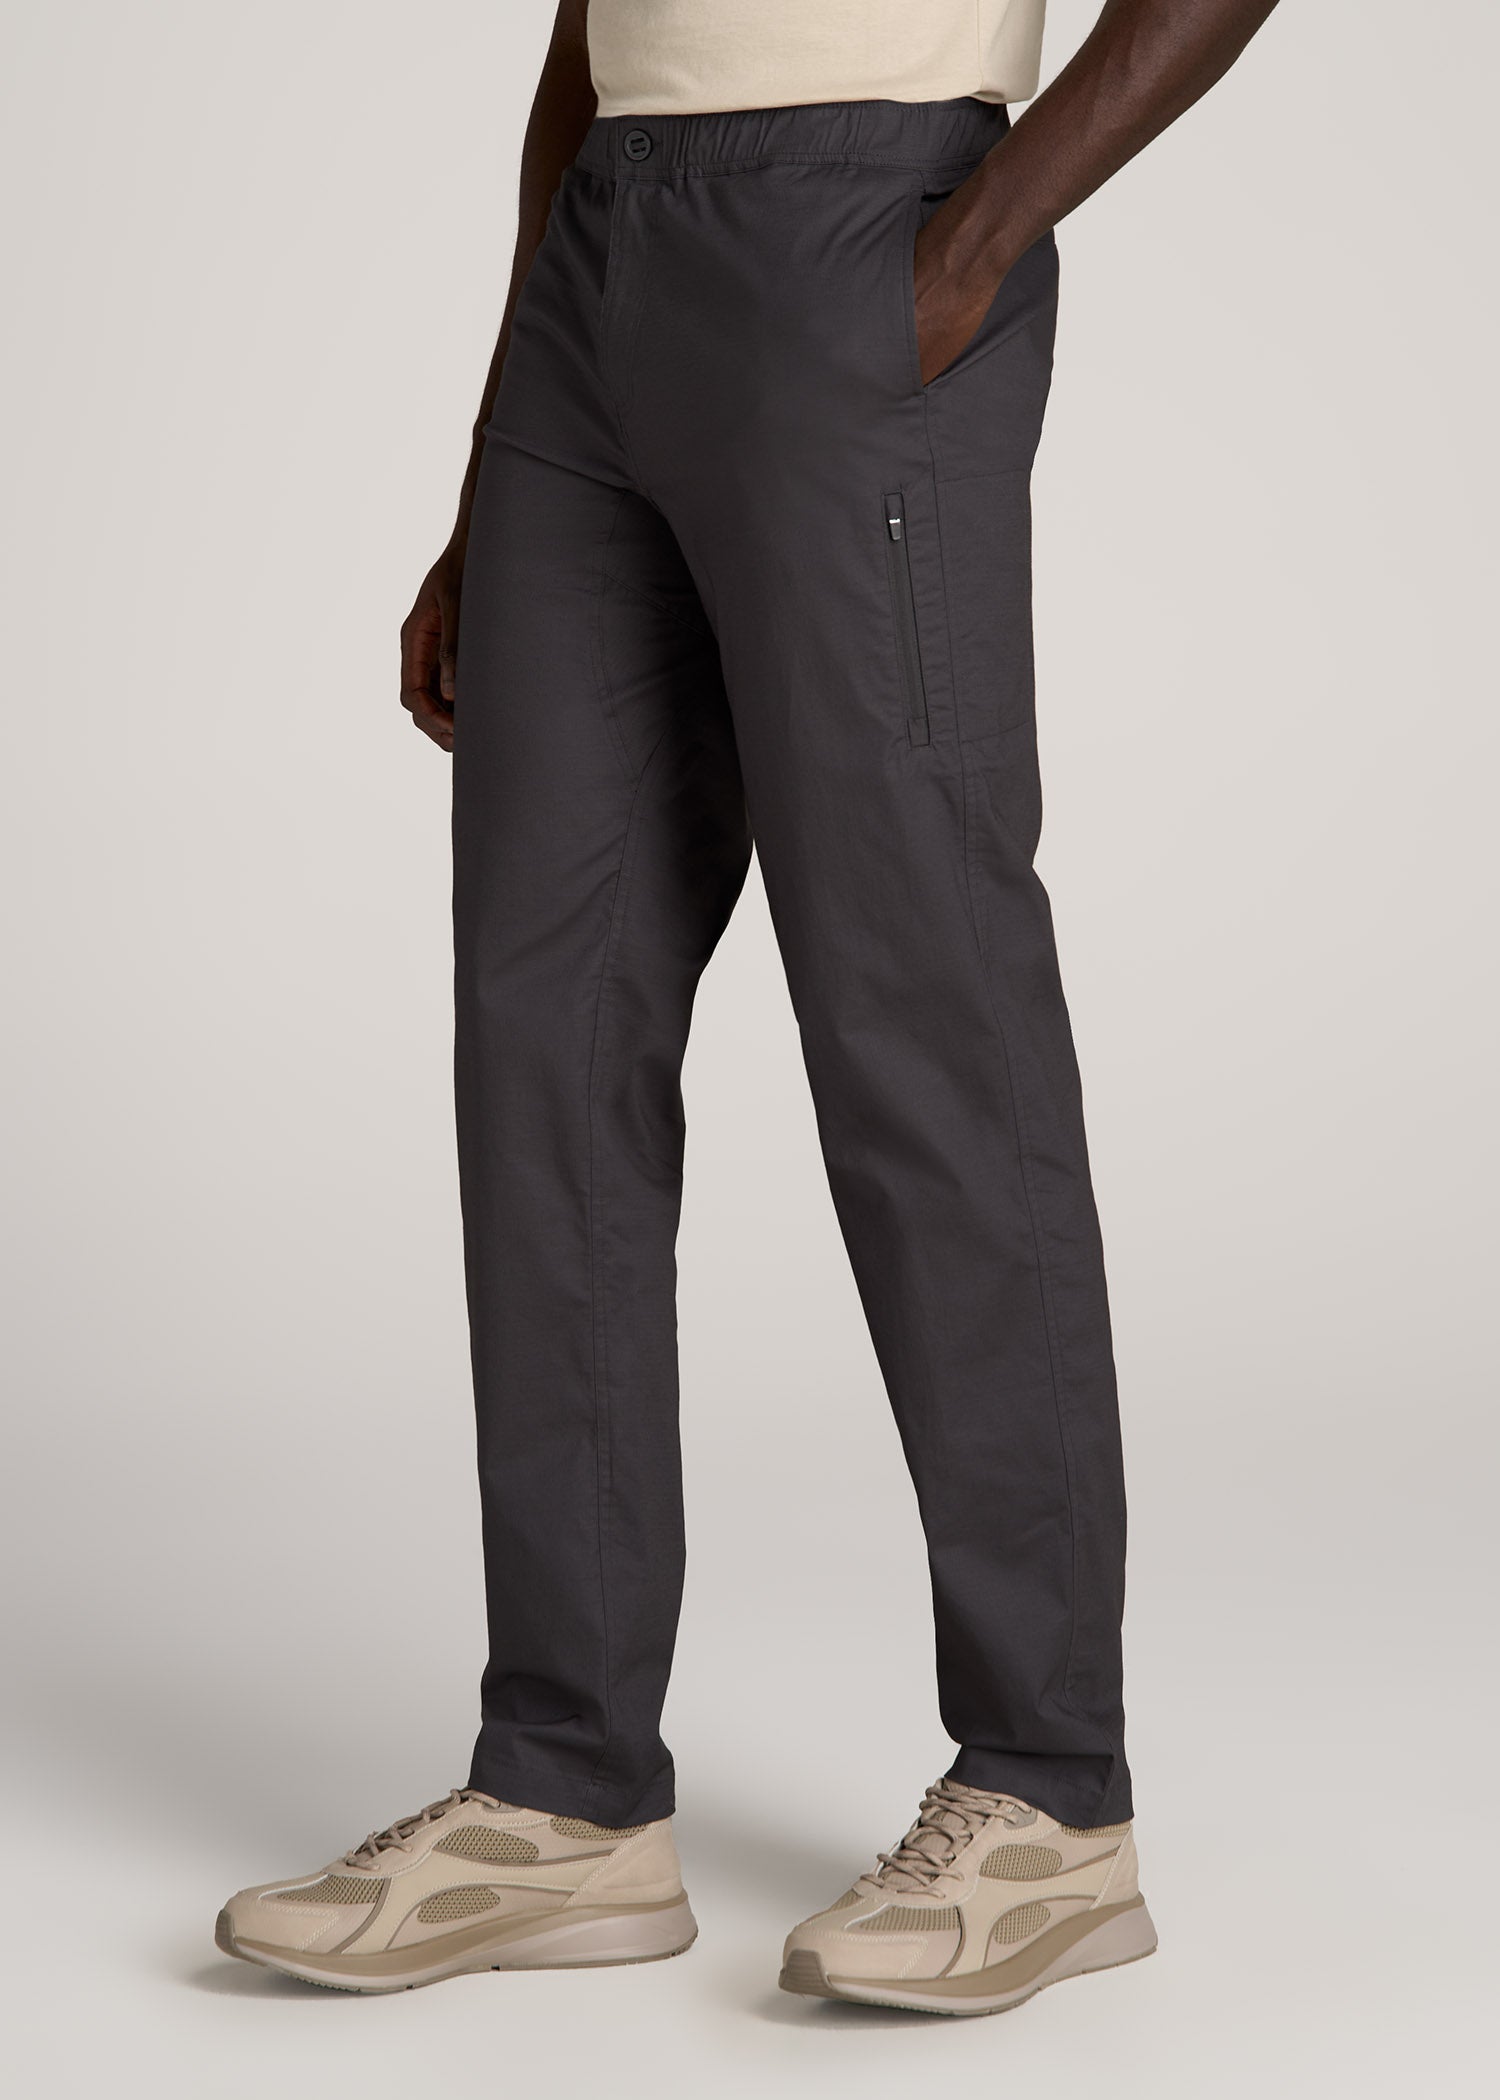 Ripstop Pants for Tall Men